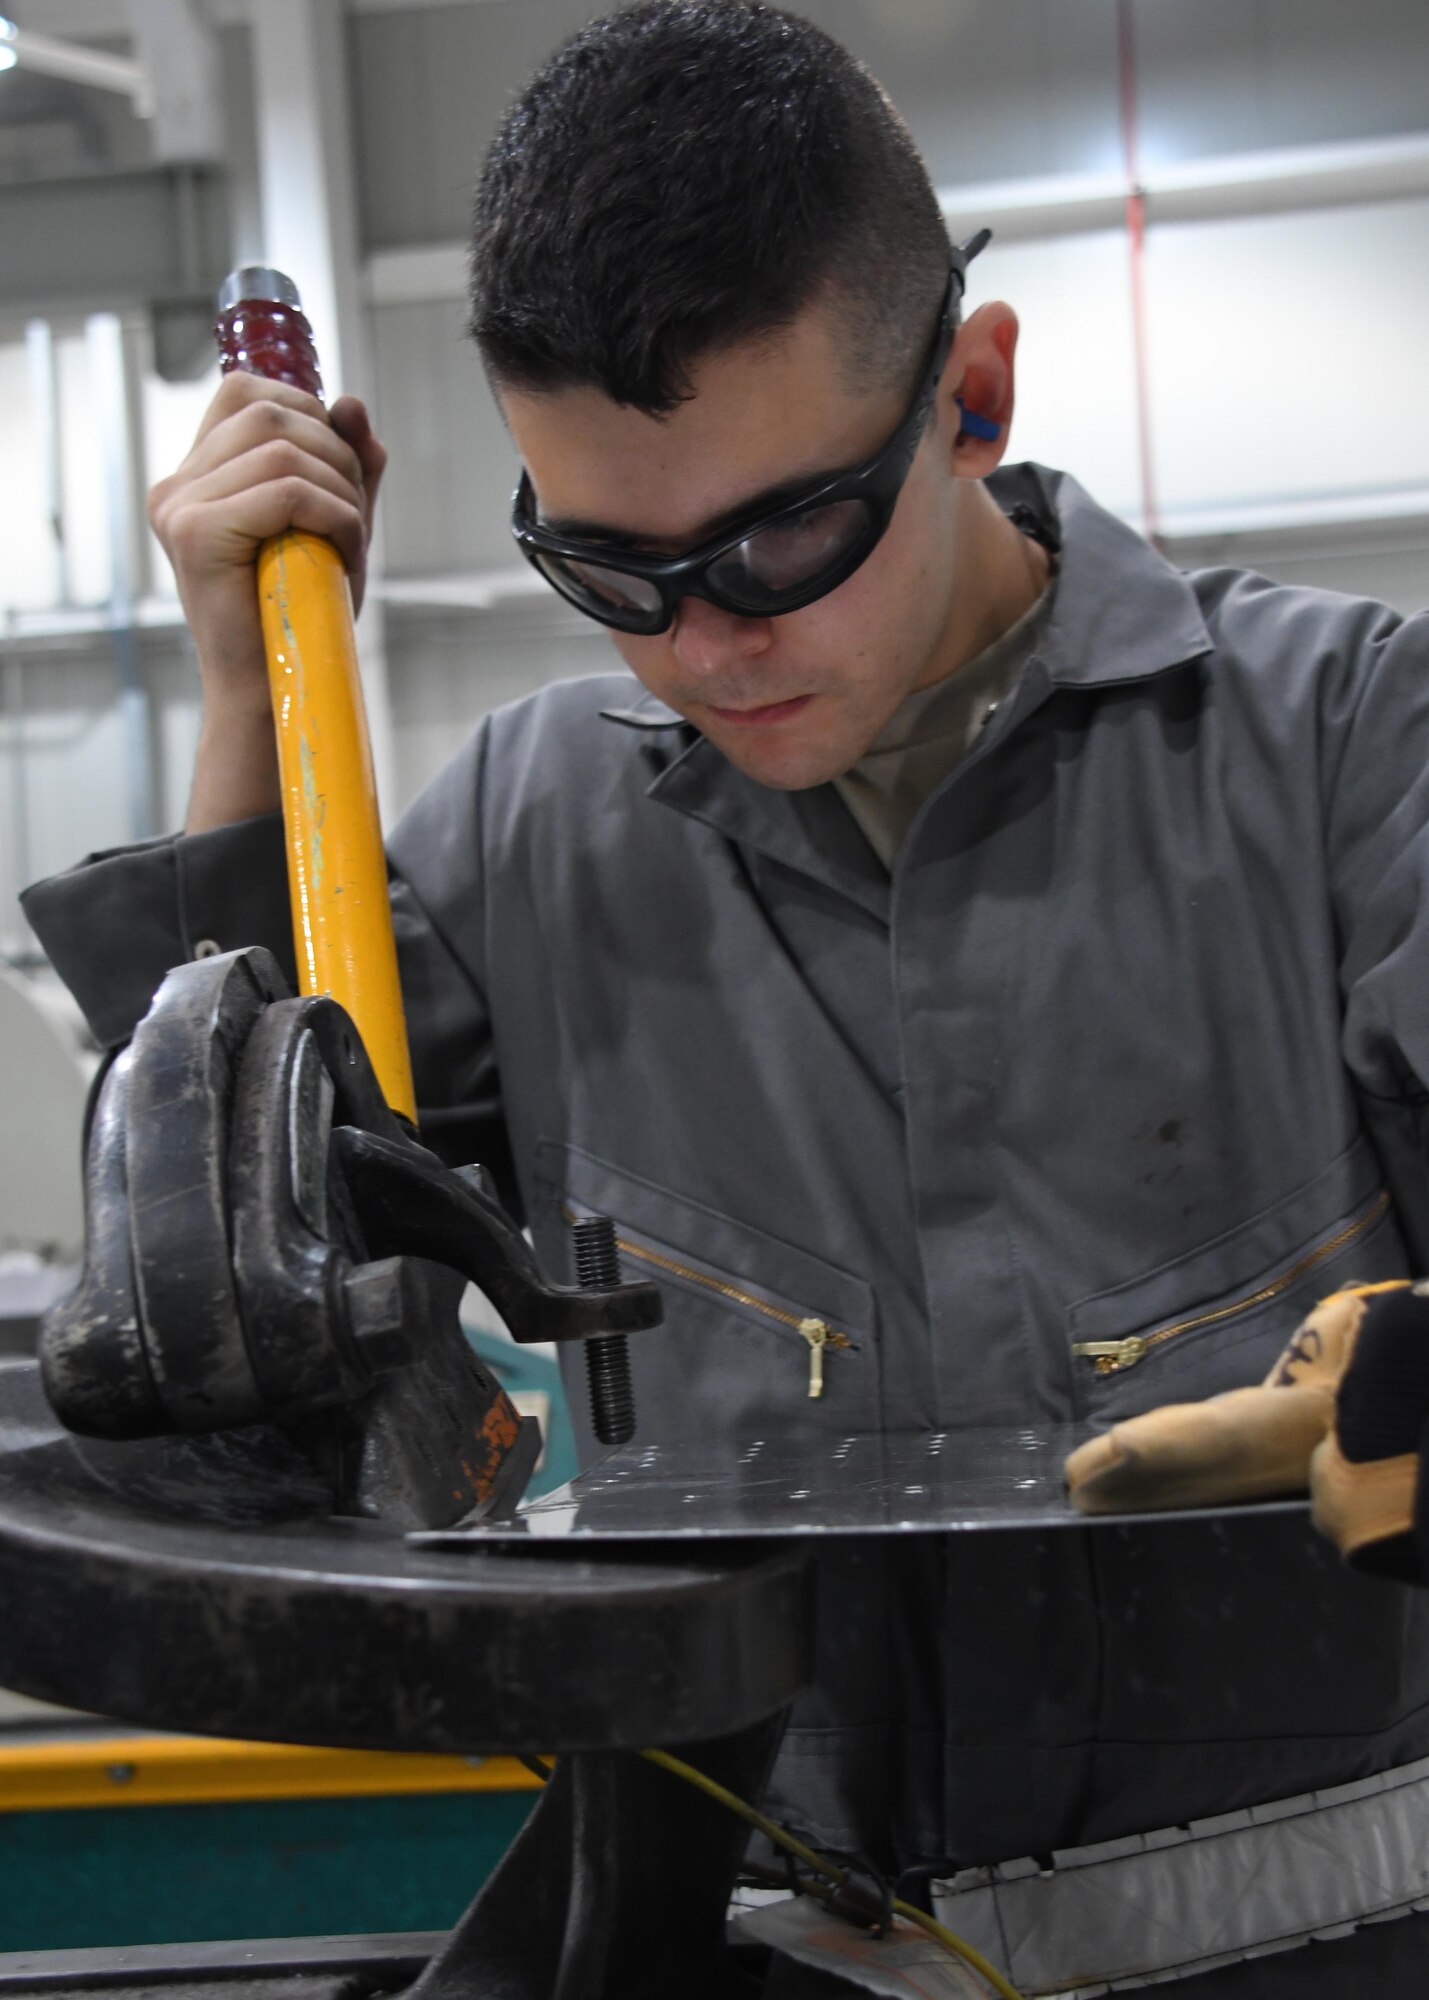 U.S. Air Force Senior Airman Wolfgang Kimsey, an aircraft structural maintenance journeyman with the 379th Expeditionary Maintenance Squadron Sheet Metal Shop, cuts a piece of metal using a throatless shear at Al Udeid Air Base, Qatar, Feb. 16, 2017. Kimsey needed to cut the metal to specific measurements to fit it into place on an outbound flap for an aircraft that lost a piece of metal during flight. (U.S. Air Force photo by Senior Airman Miles Wilson)